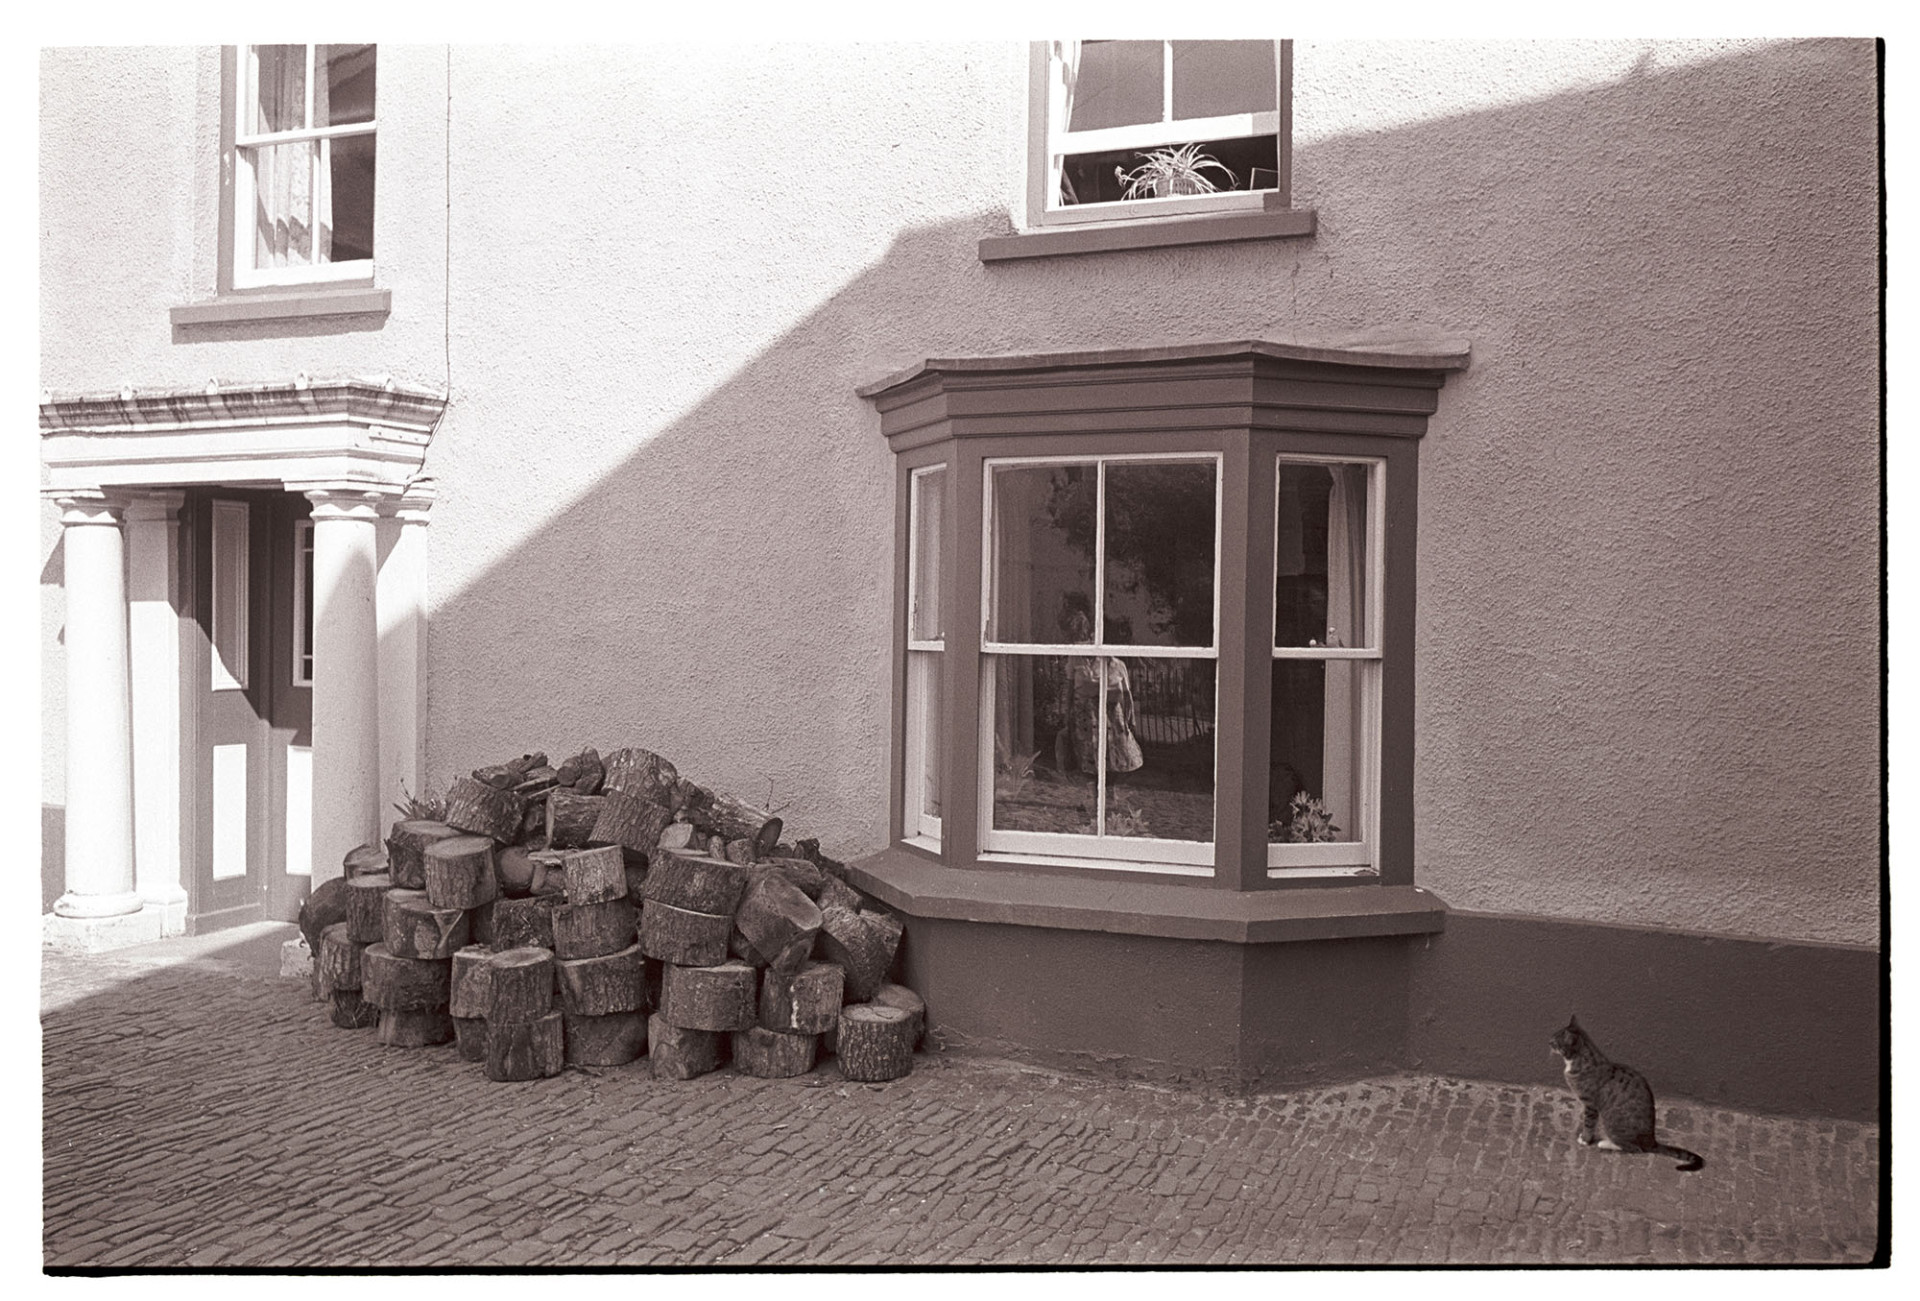 Former school house with cat looking at pile of logs CATaLOGue !!!Geddit Arggggh!!!
[A cat sat outside a house, with a bay window, looking at a pile of logs by pillars at the front door. The house was formerly the School House in Chulmleigh.]